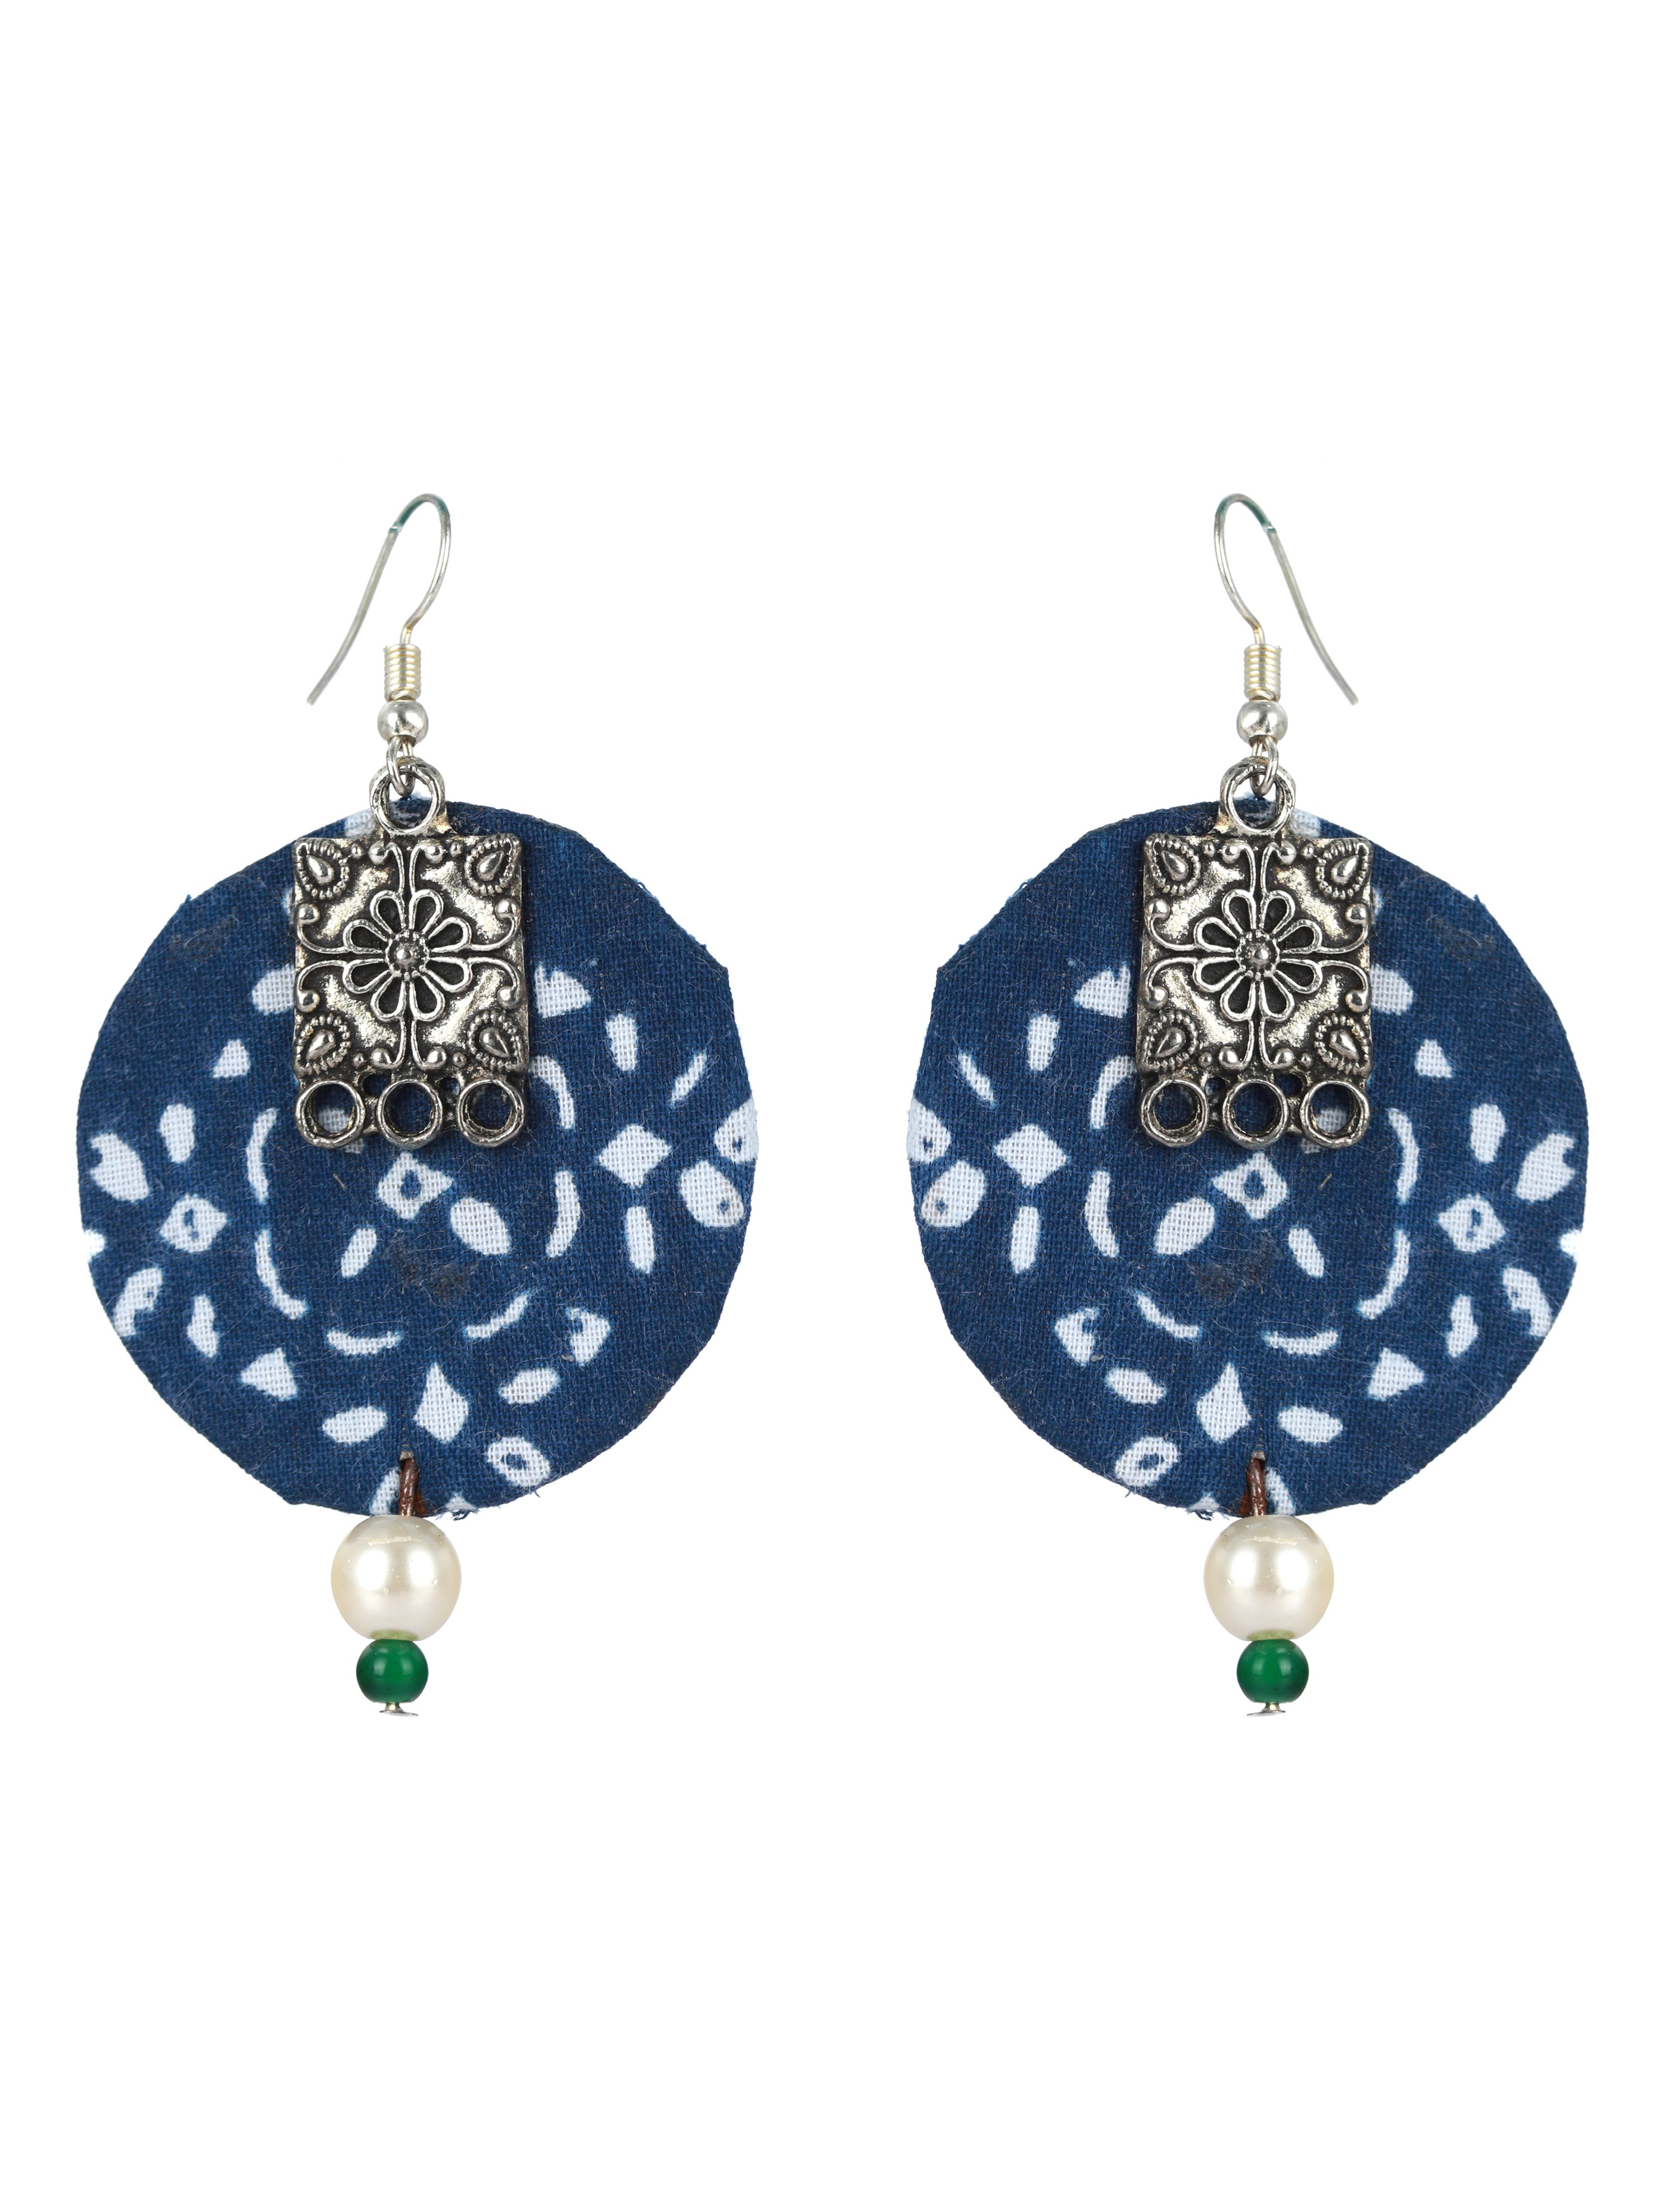 Blue and White Handpainted Fabric Material & Silver Work with White & Green Beads Jewellery Set - Jazzandsizzle